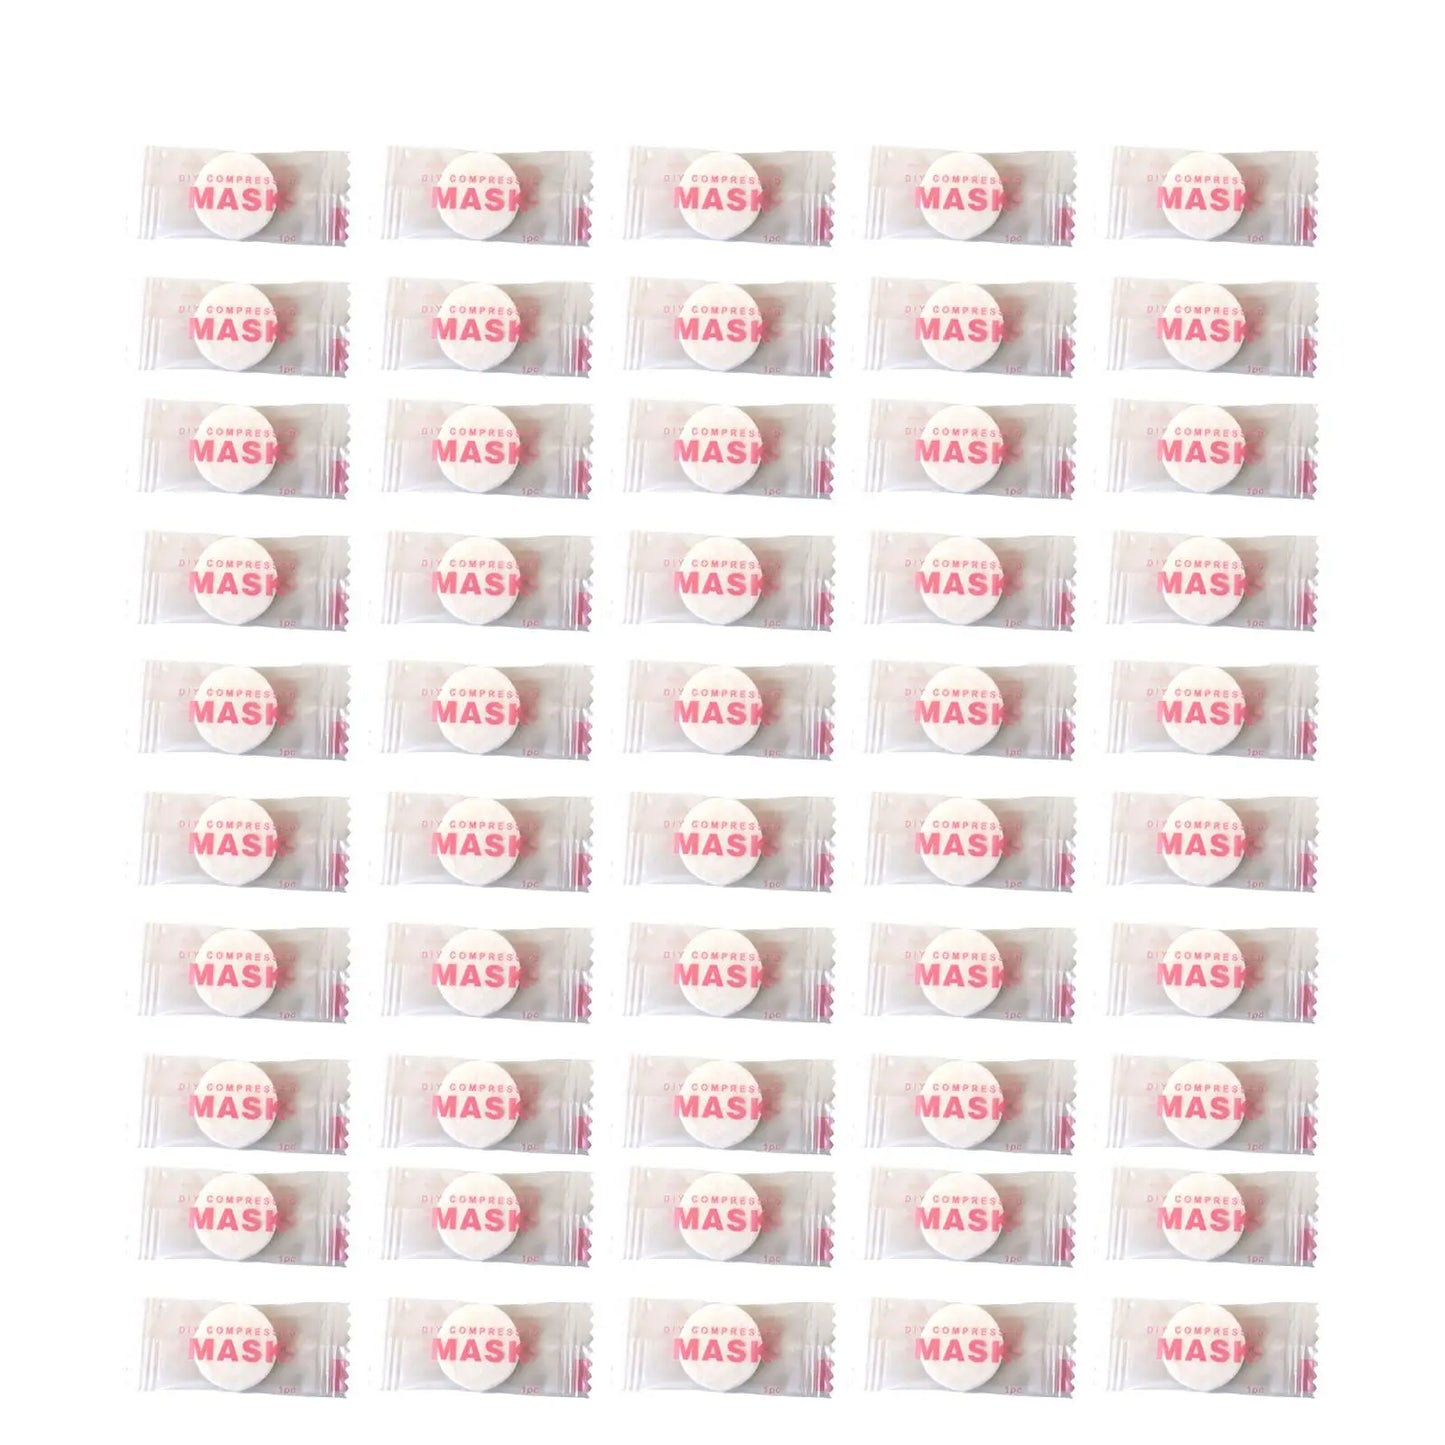 50pcs/Bag Travel Outdoor Pure Cotton Non Woven Compressed Disposable Facial Towel Sheet Cloth Wet Wipes Tissue Mask Makeup Clean